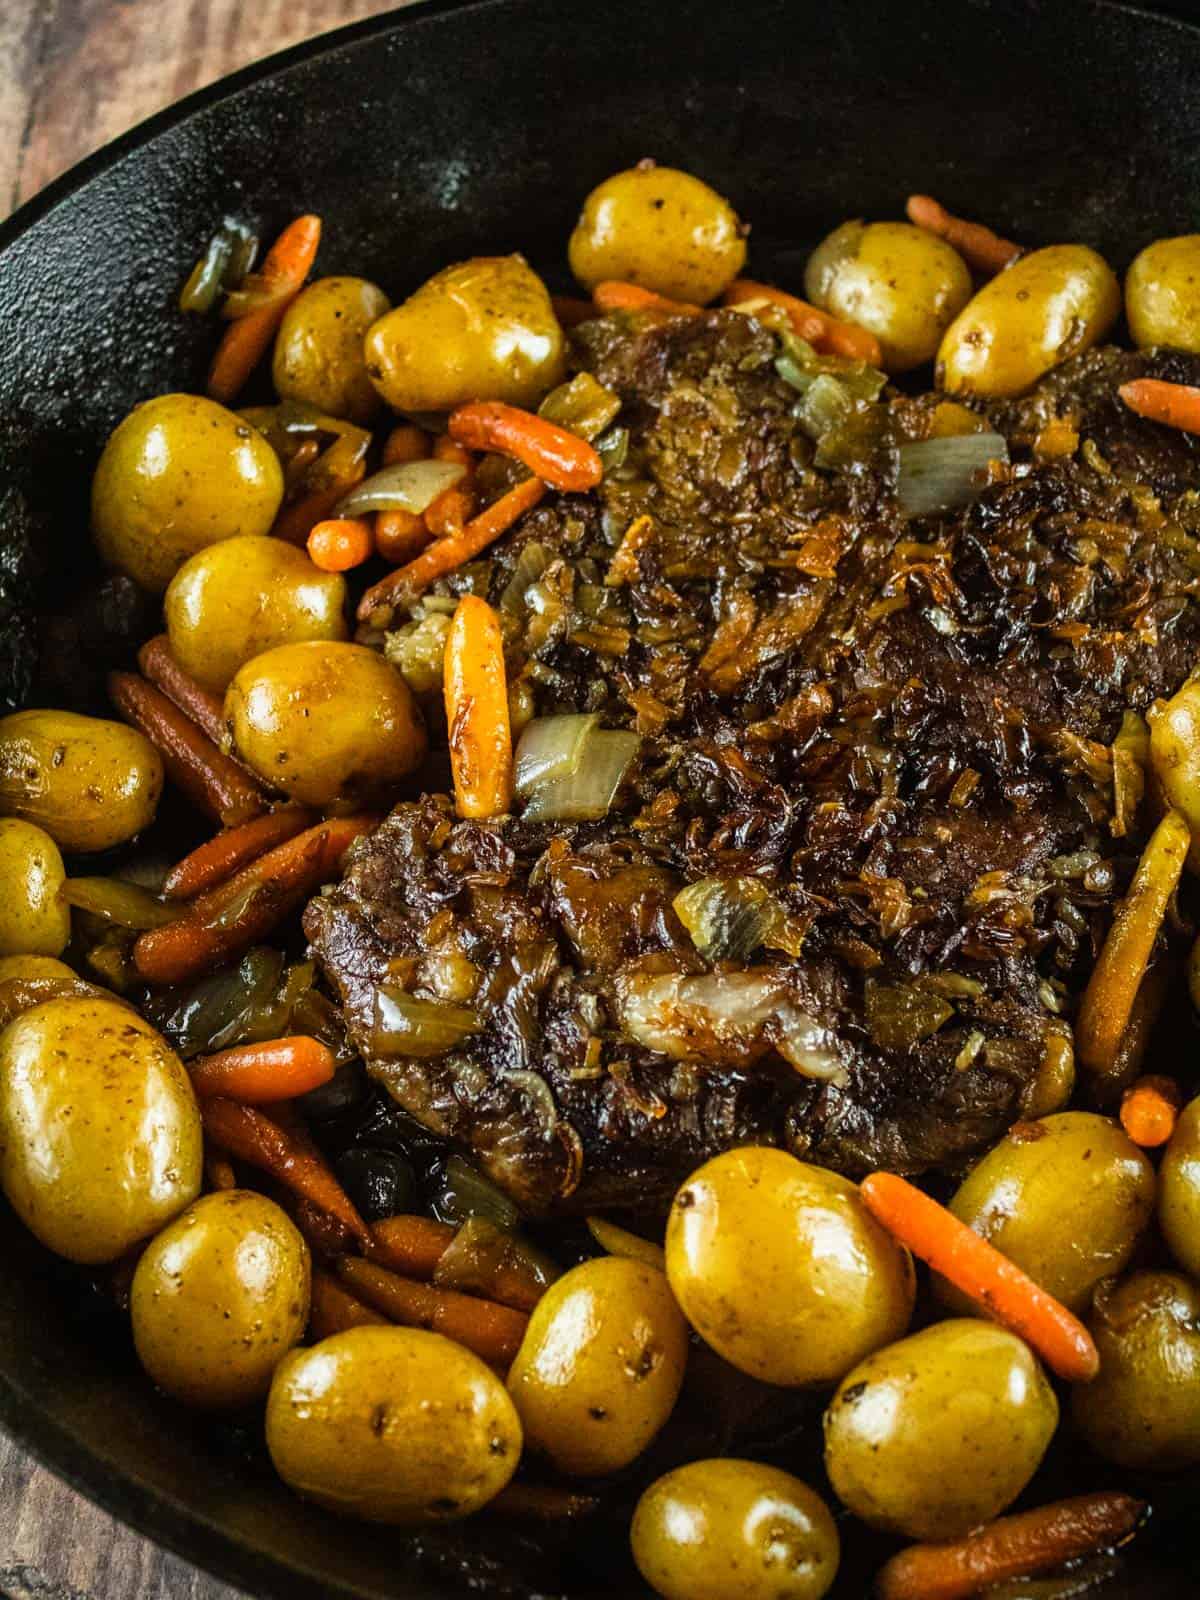 cook pot roast with yellow potatoes, baby carrots and sliced onions in a cast iron skillet.